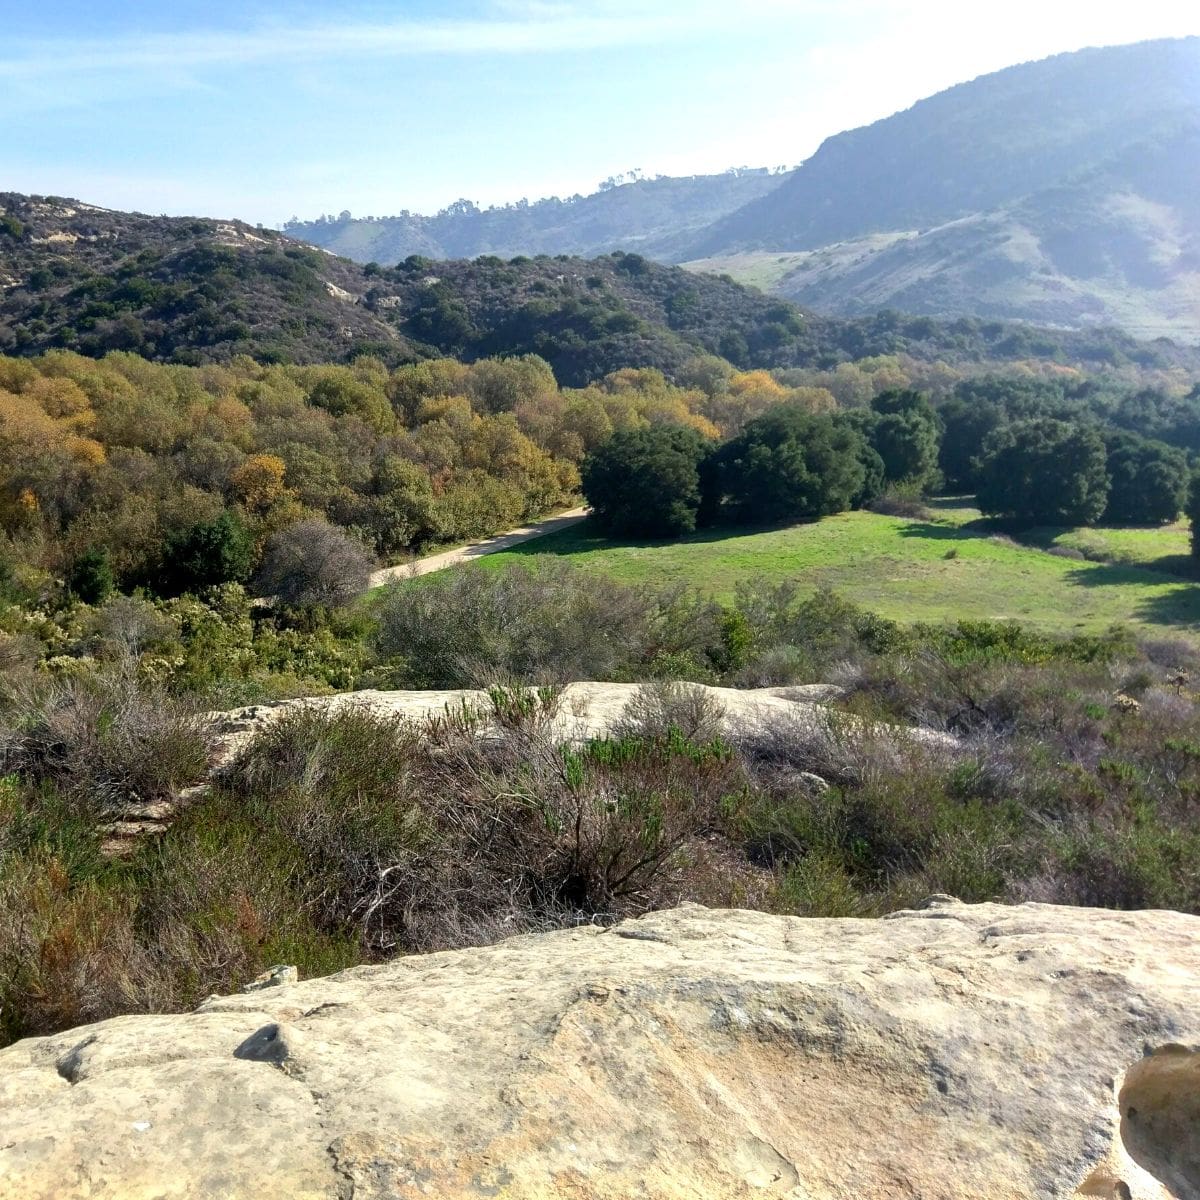 Aliso and Wood Canyons Regional Park